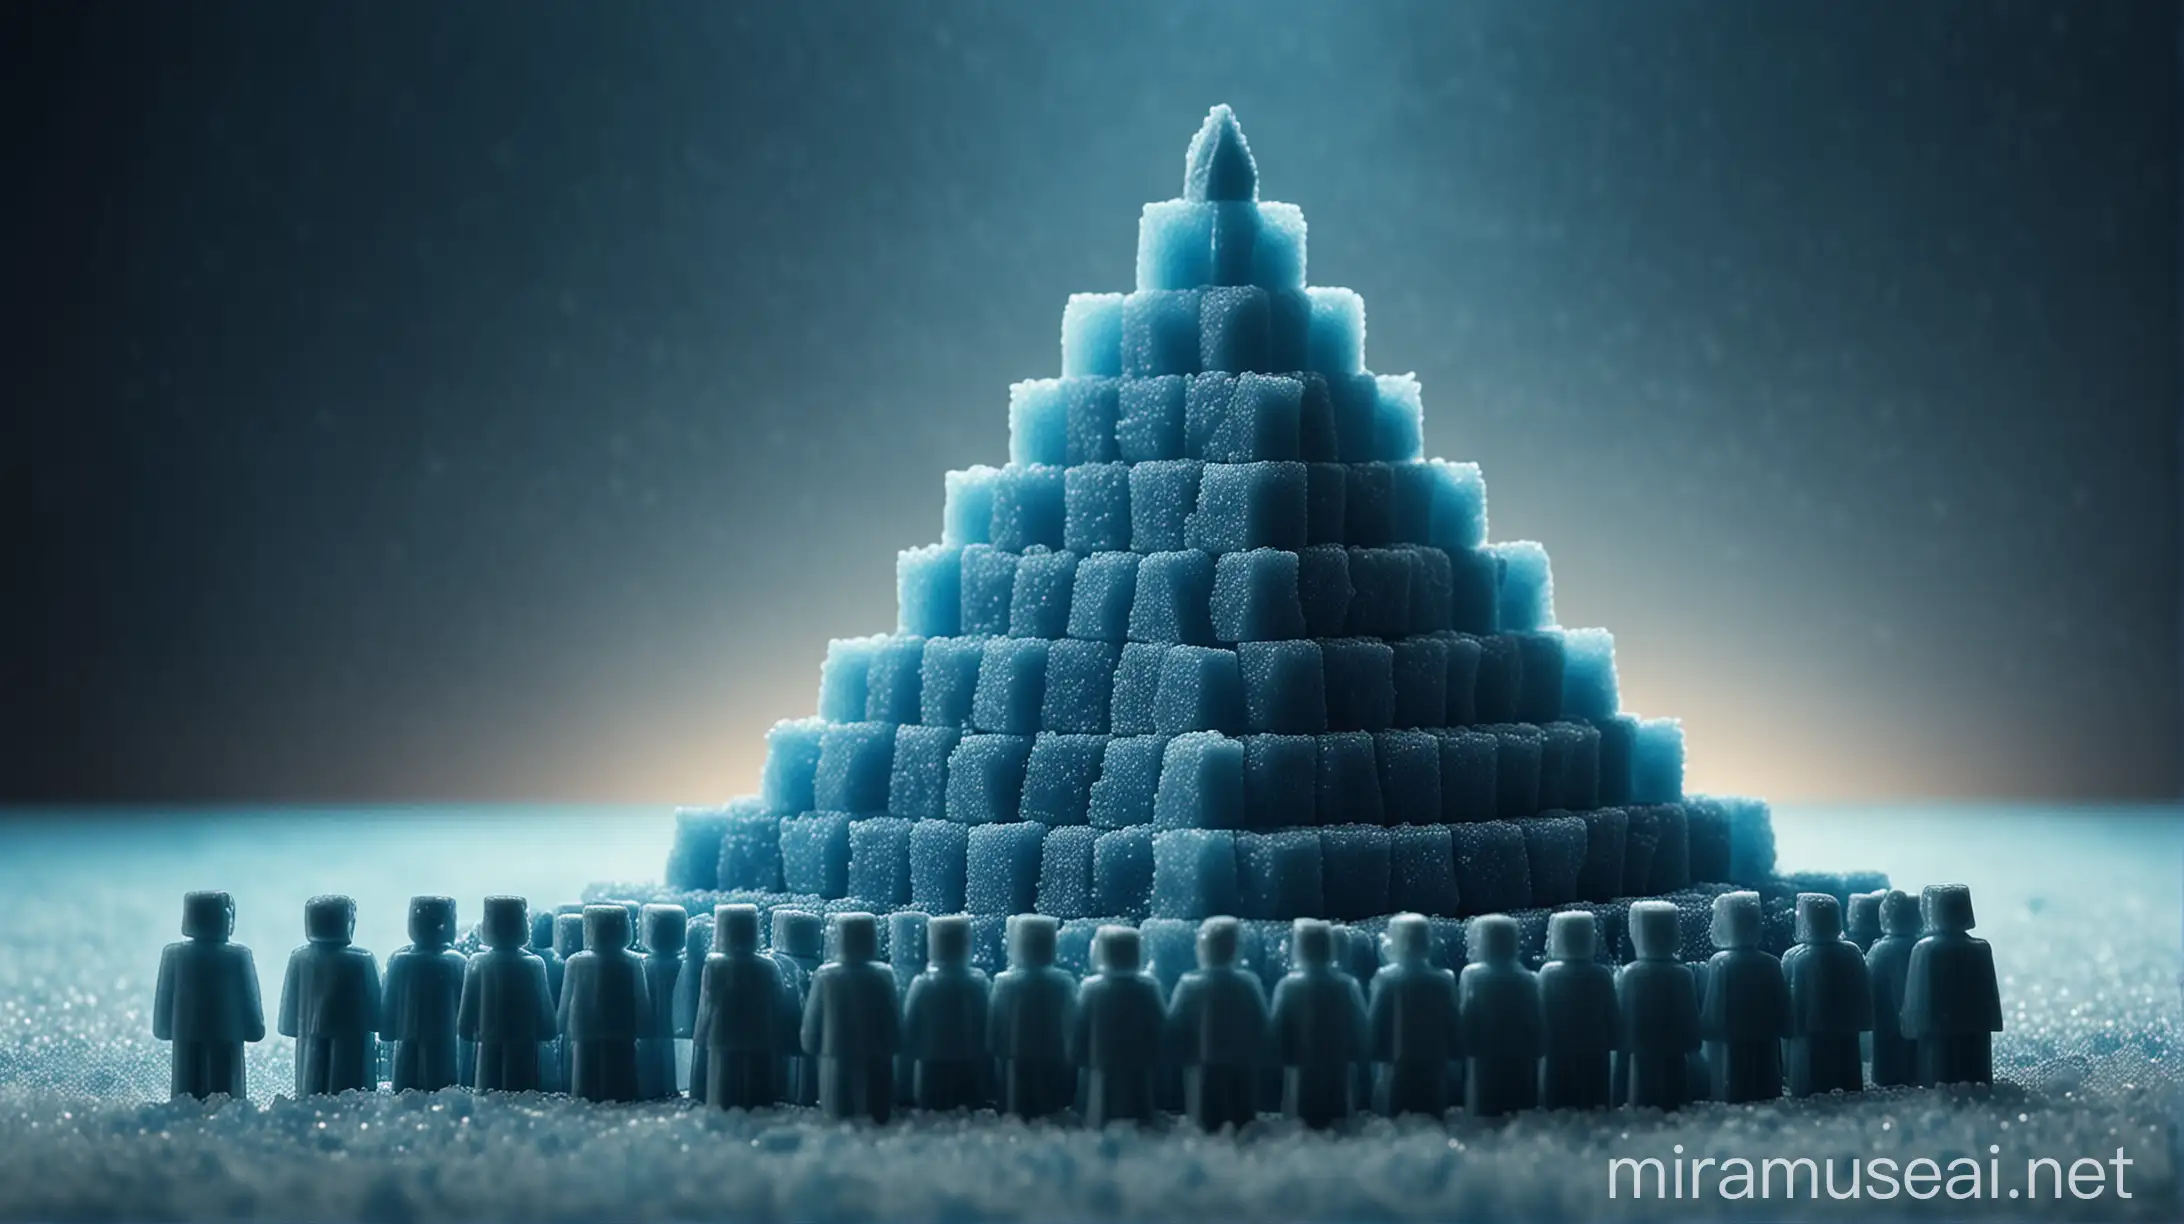 pyramid made of blue sugar cubes, blue colour only, cinematic blue light at background, with mini people made of wax standing on pyramid